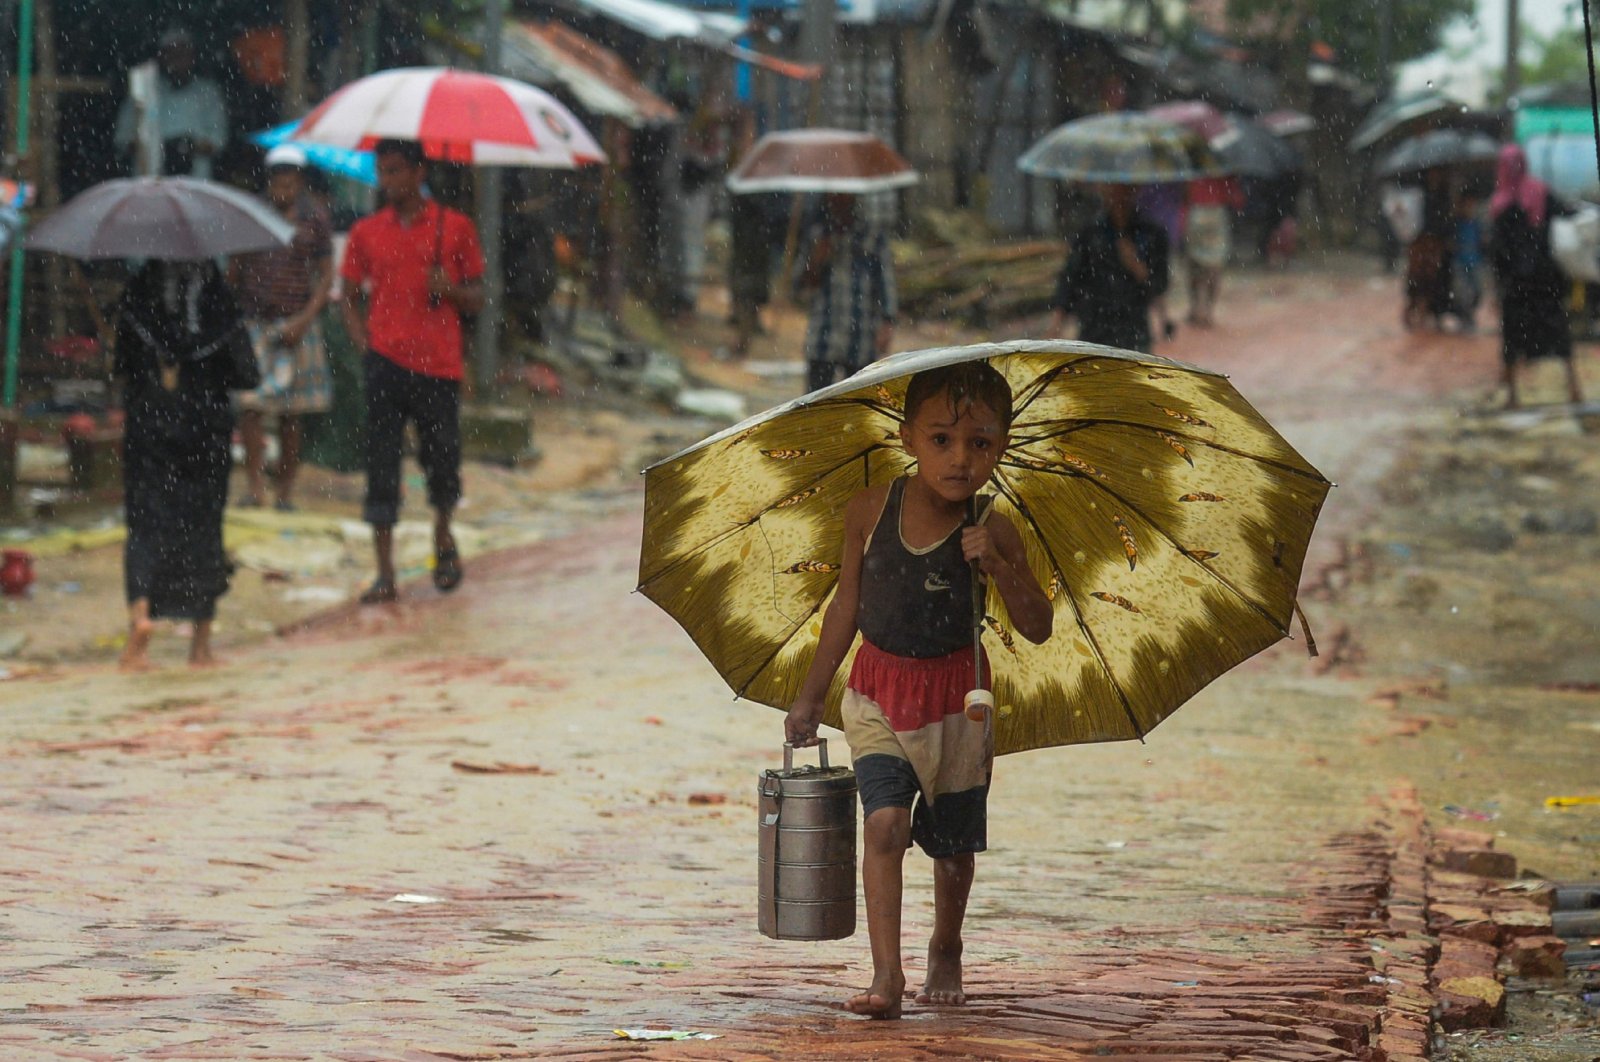 A Rohingya refugee boy shelters under an umbrella as he makes his way during monsoon rainfall at Kutupalong refugee camp in Ukhia, Cox's Bazar, Bangladesh, Sept. 12, 2019. (AFP Photo)